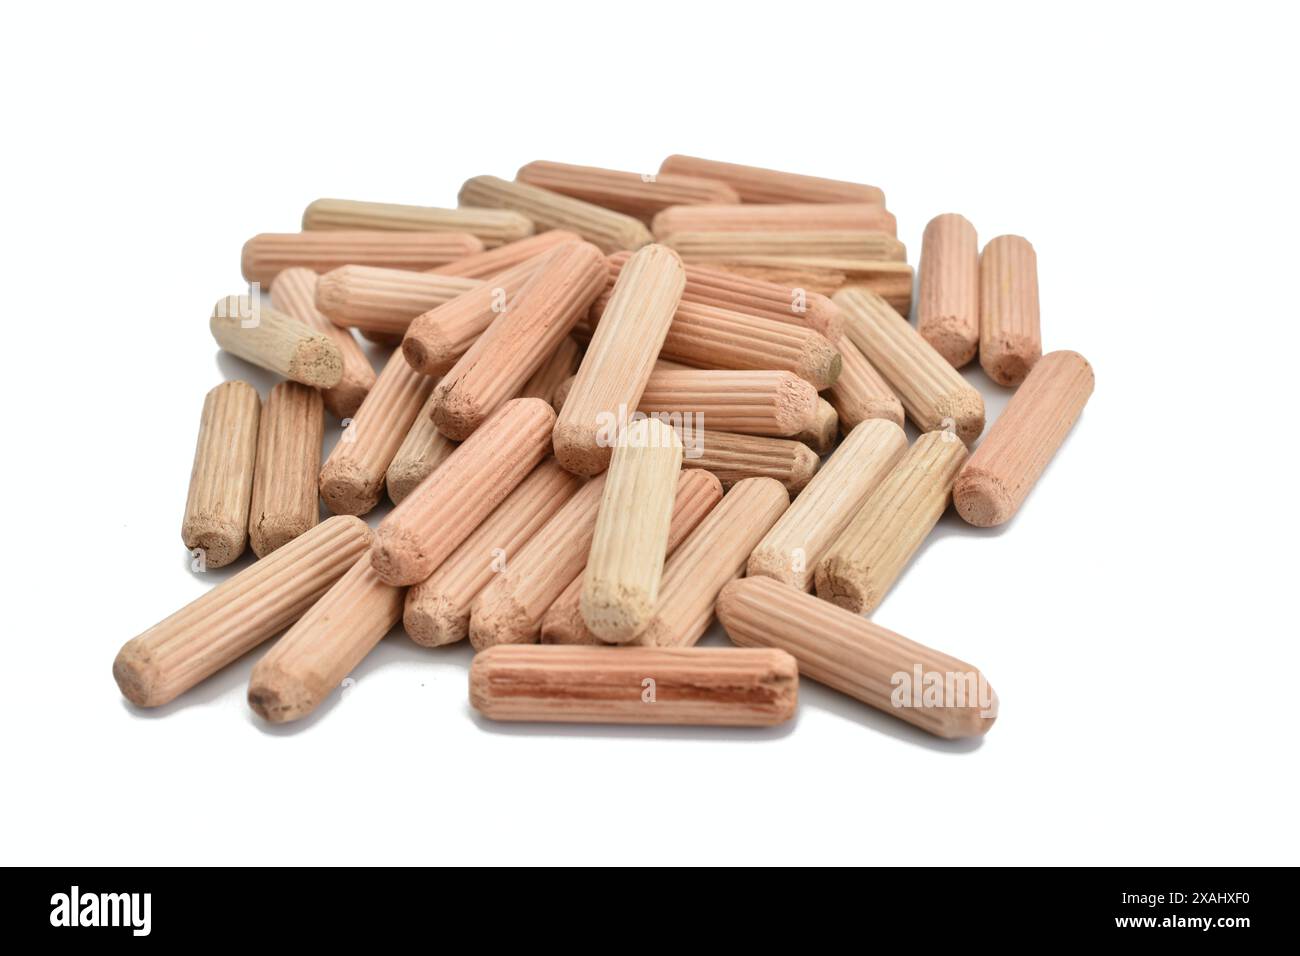 In the photo, dowels made of wood used in furniture production are lying in a heap. Stock Photo